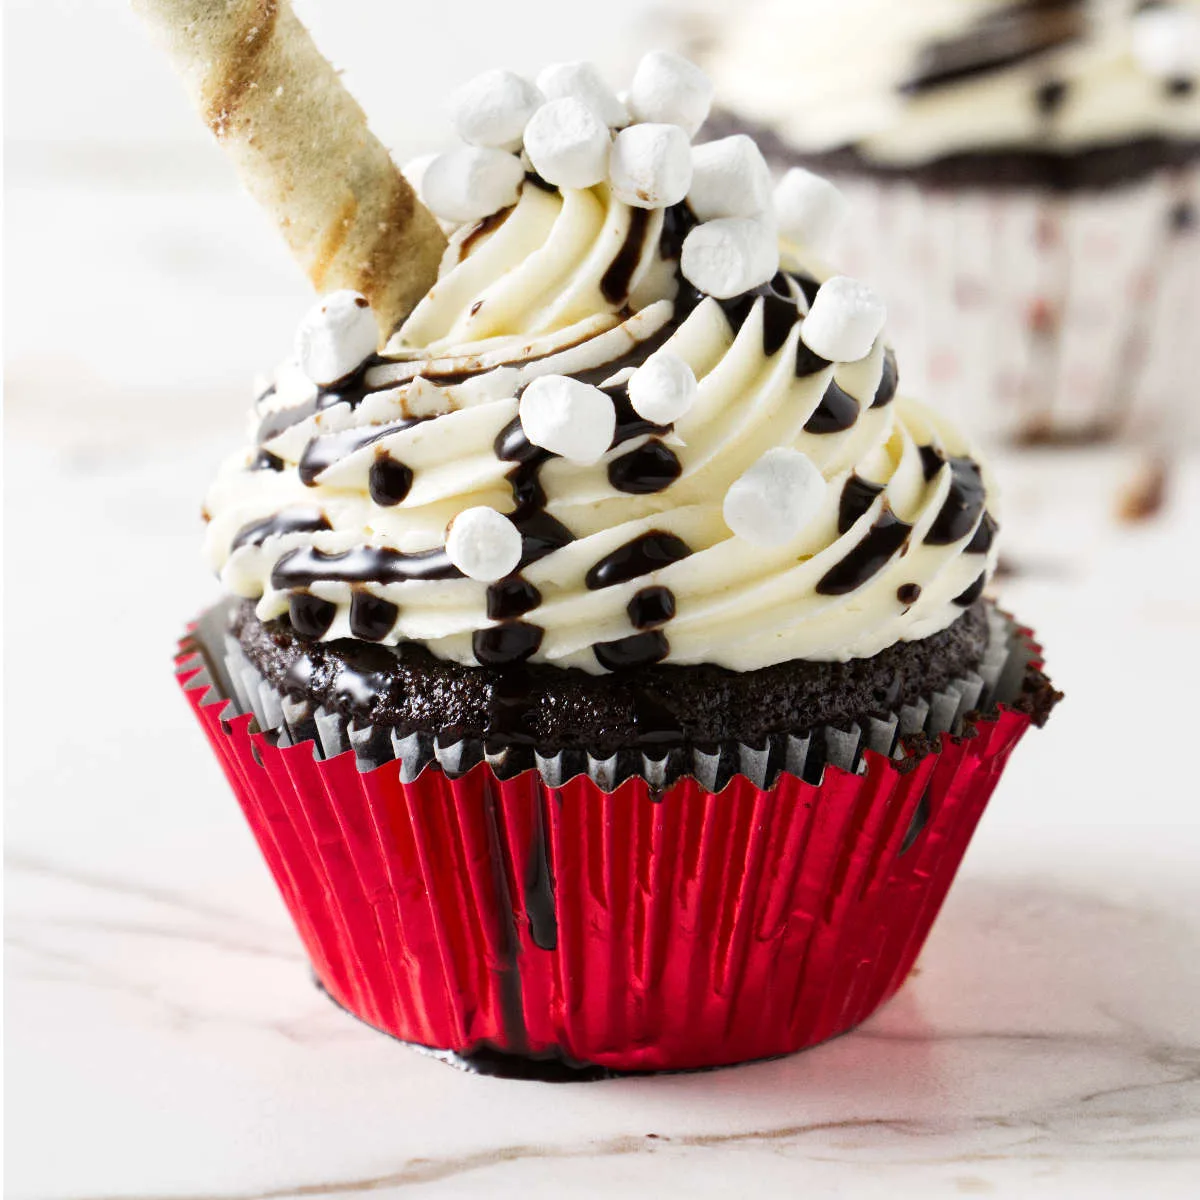 Chocolate with buttercream, chocolate drizzle, and miniature marshmallows.